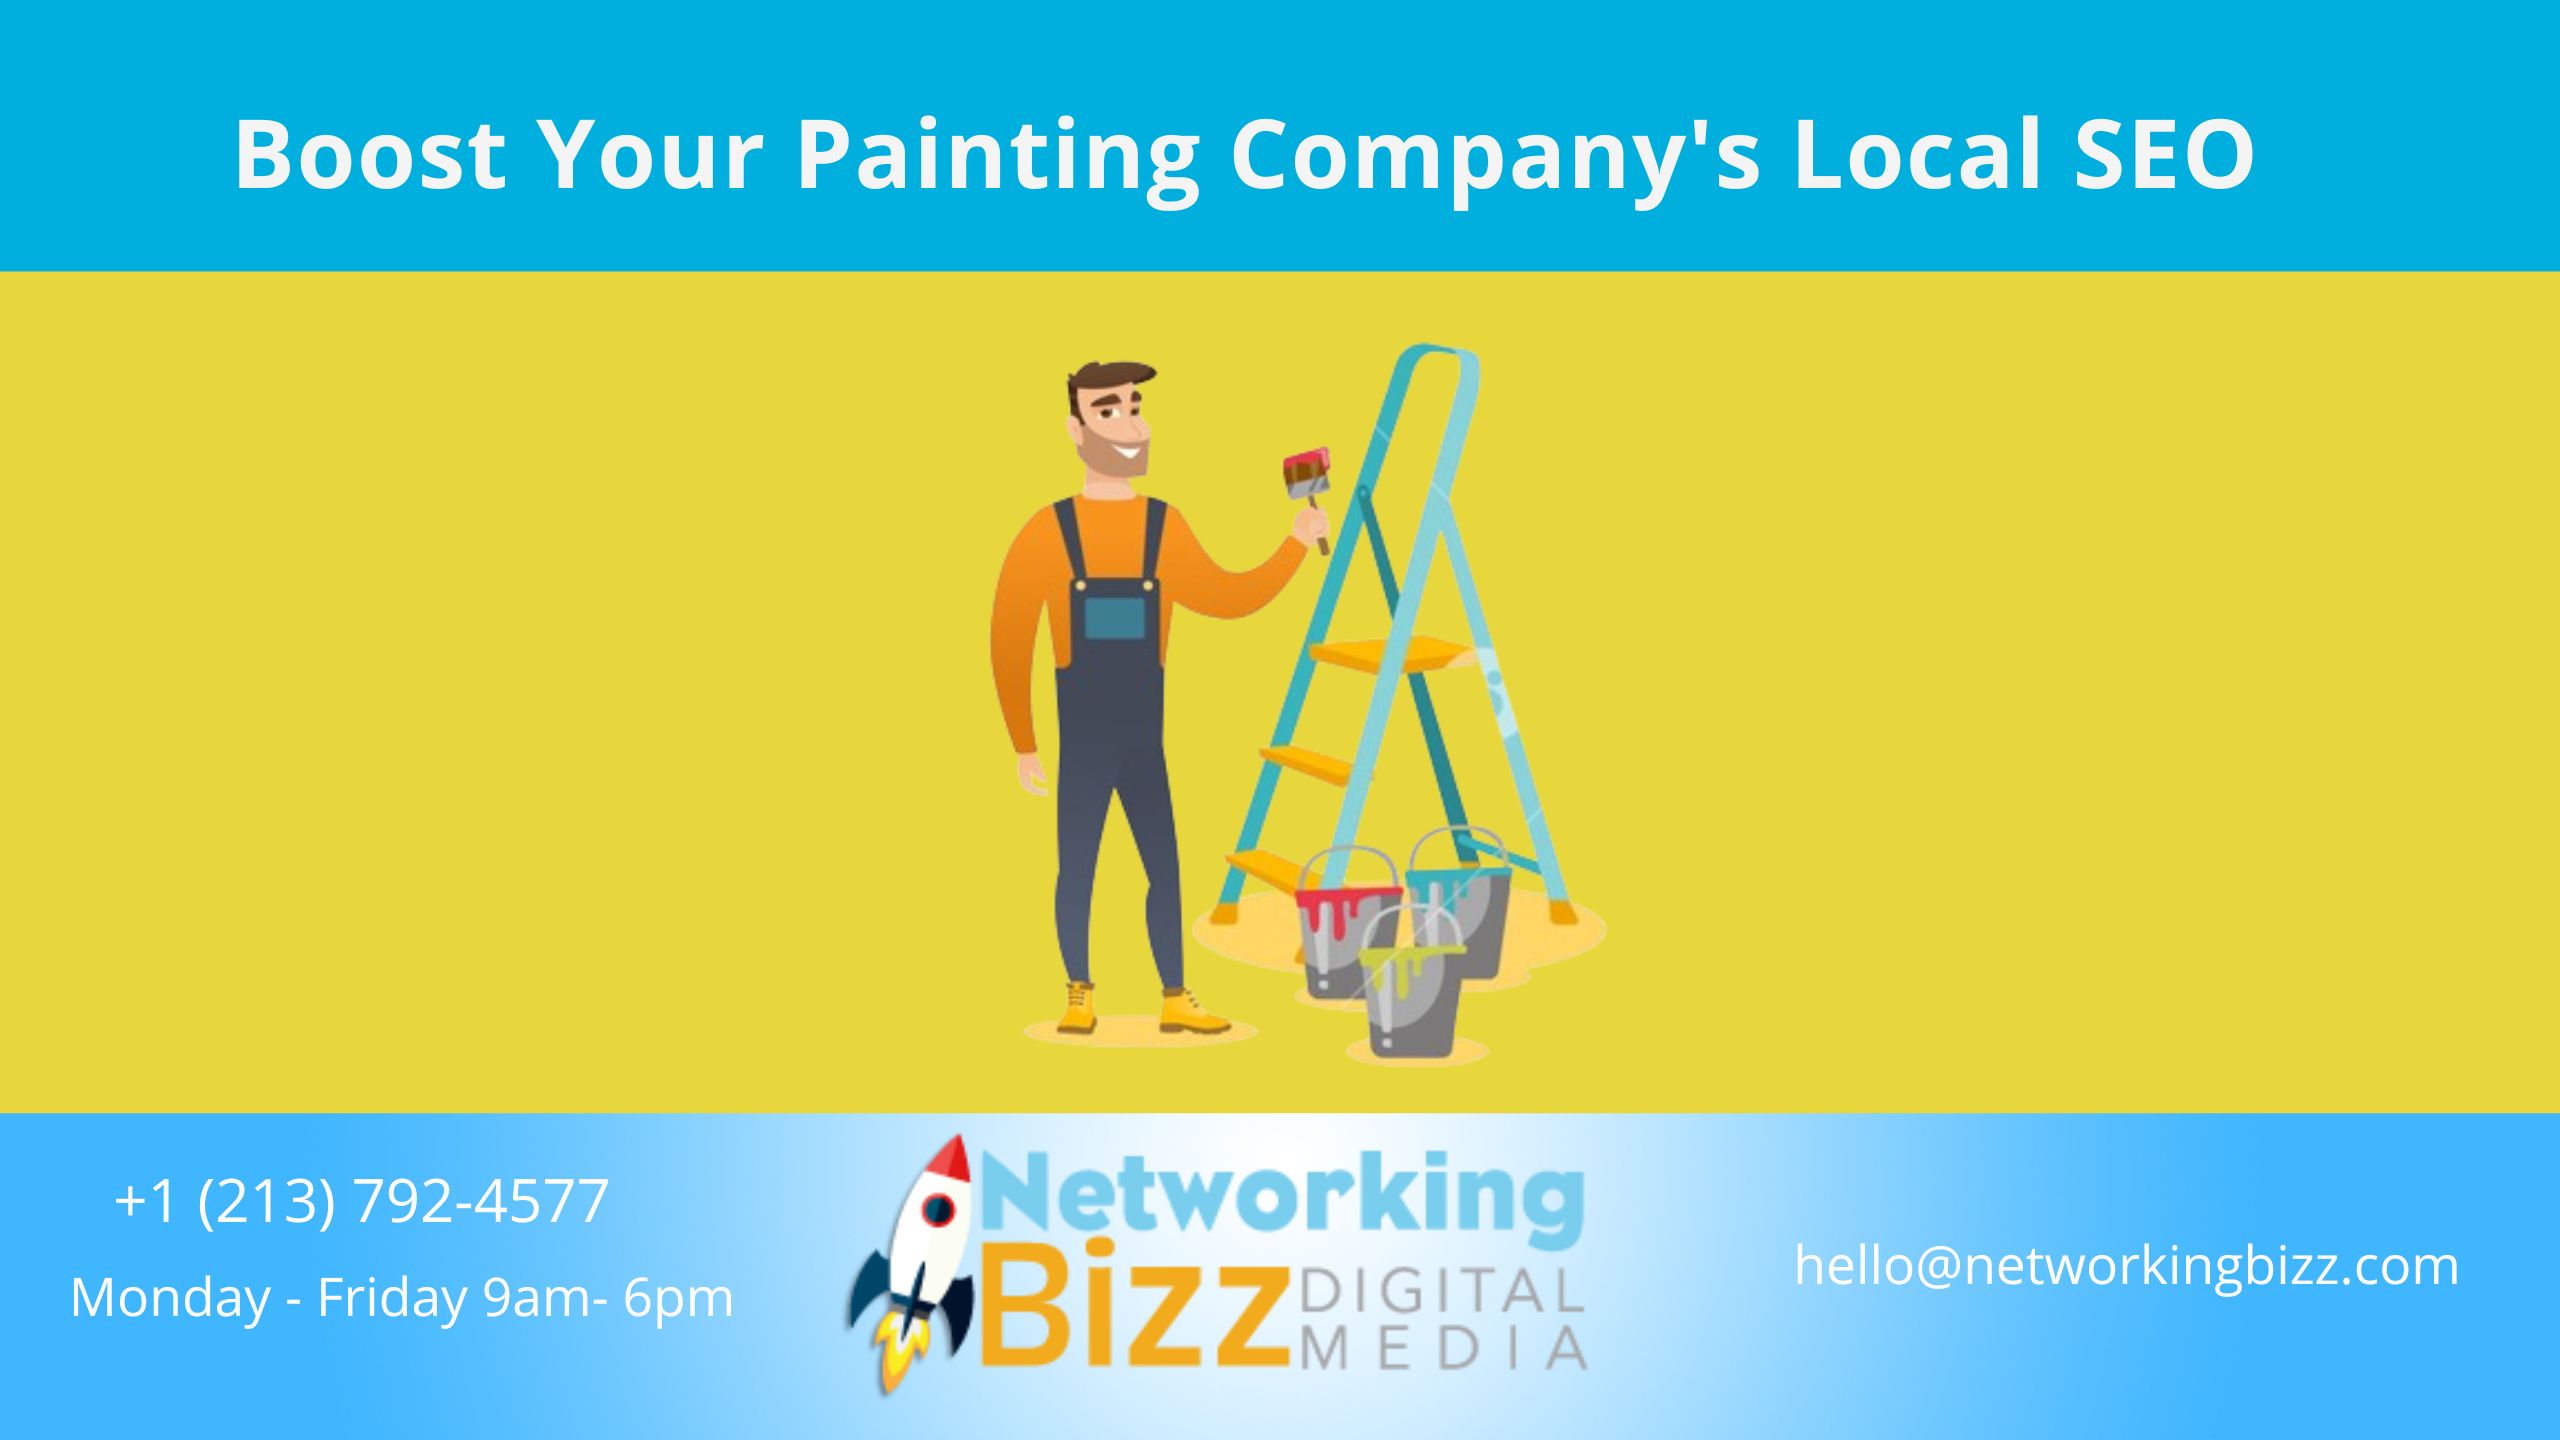 Boost Your Painting Company’s Local SEO